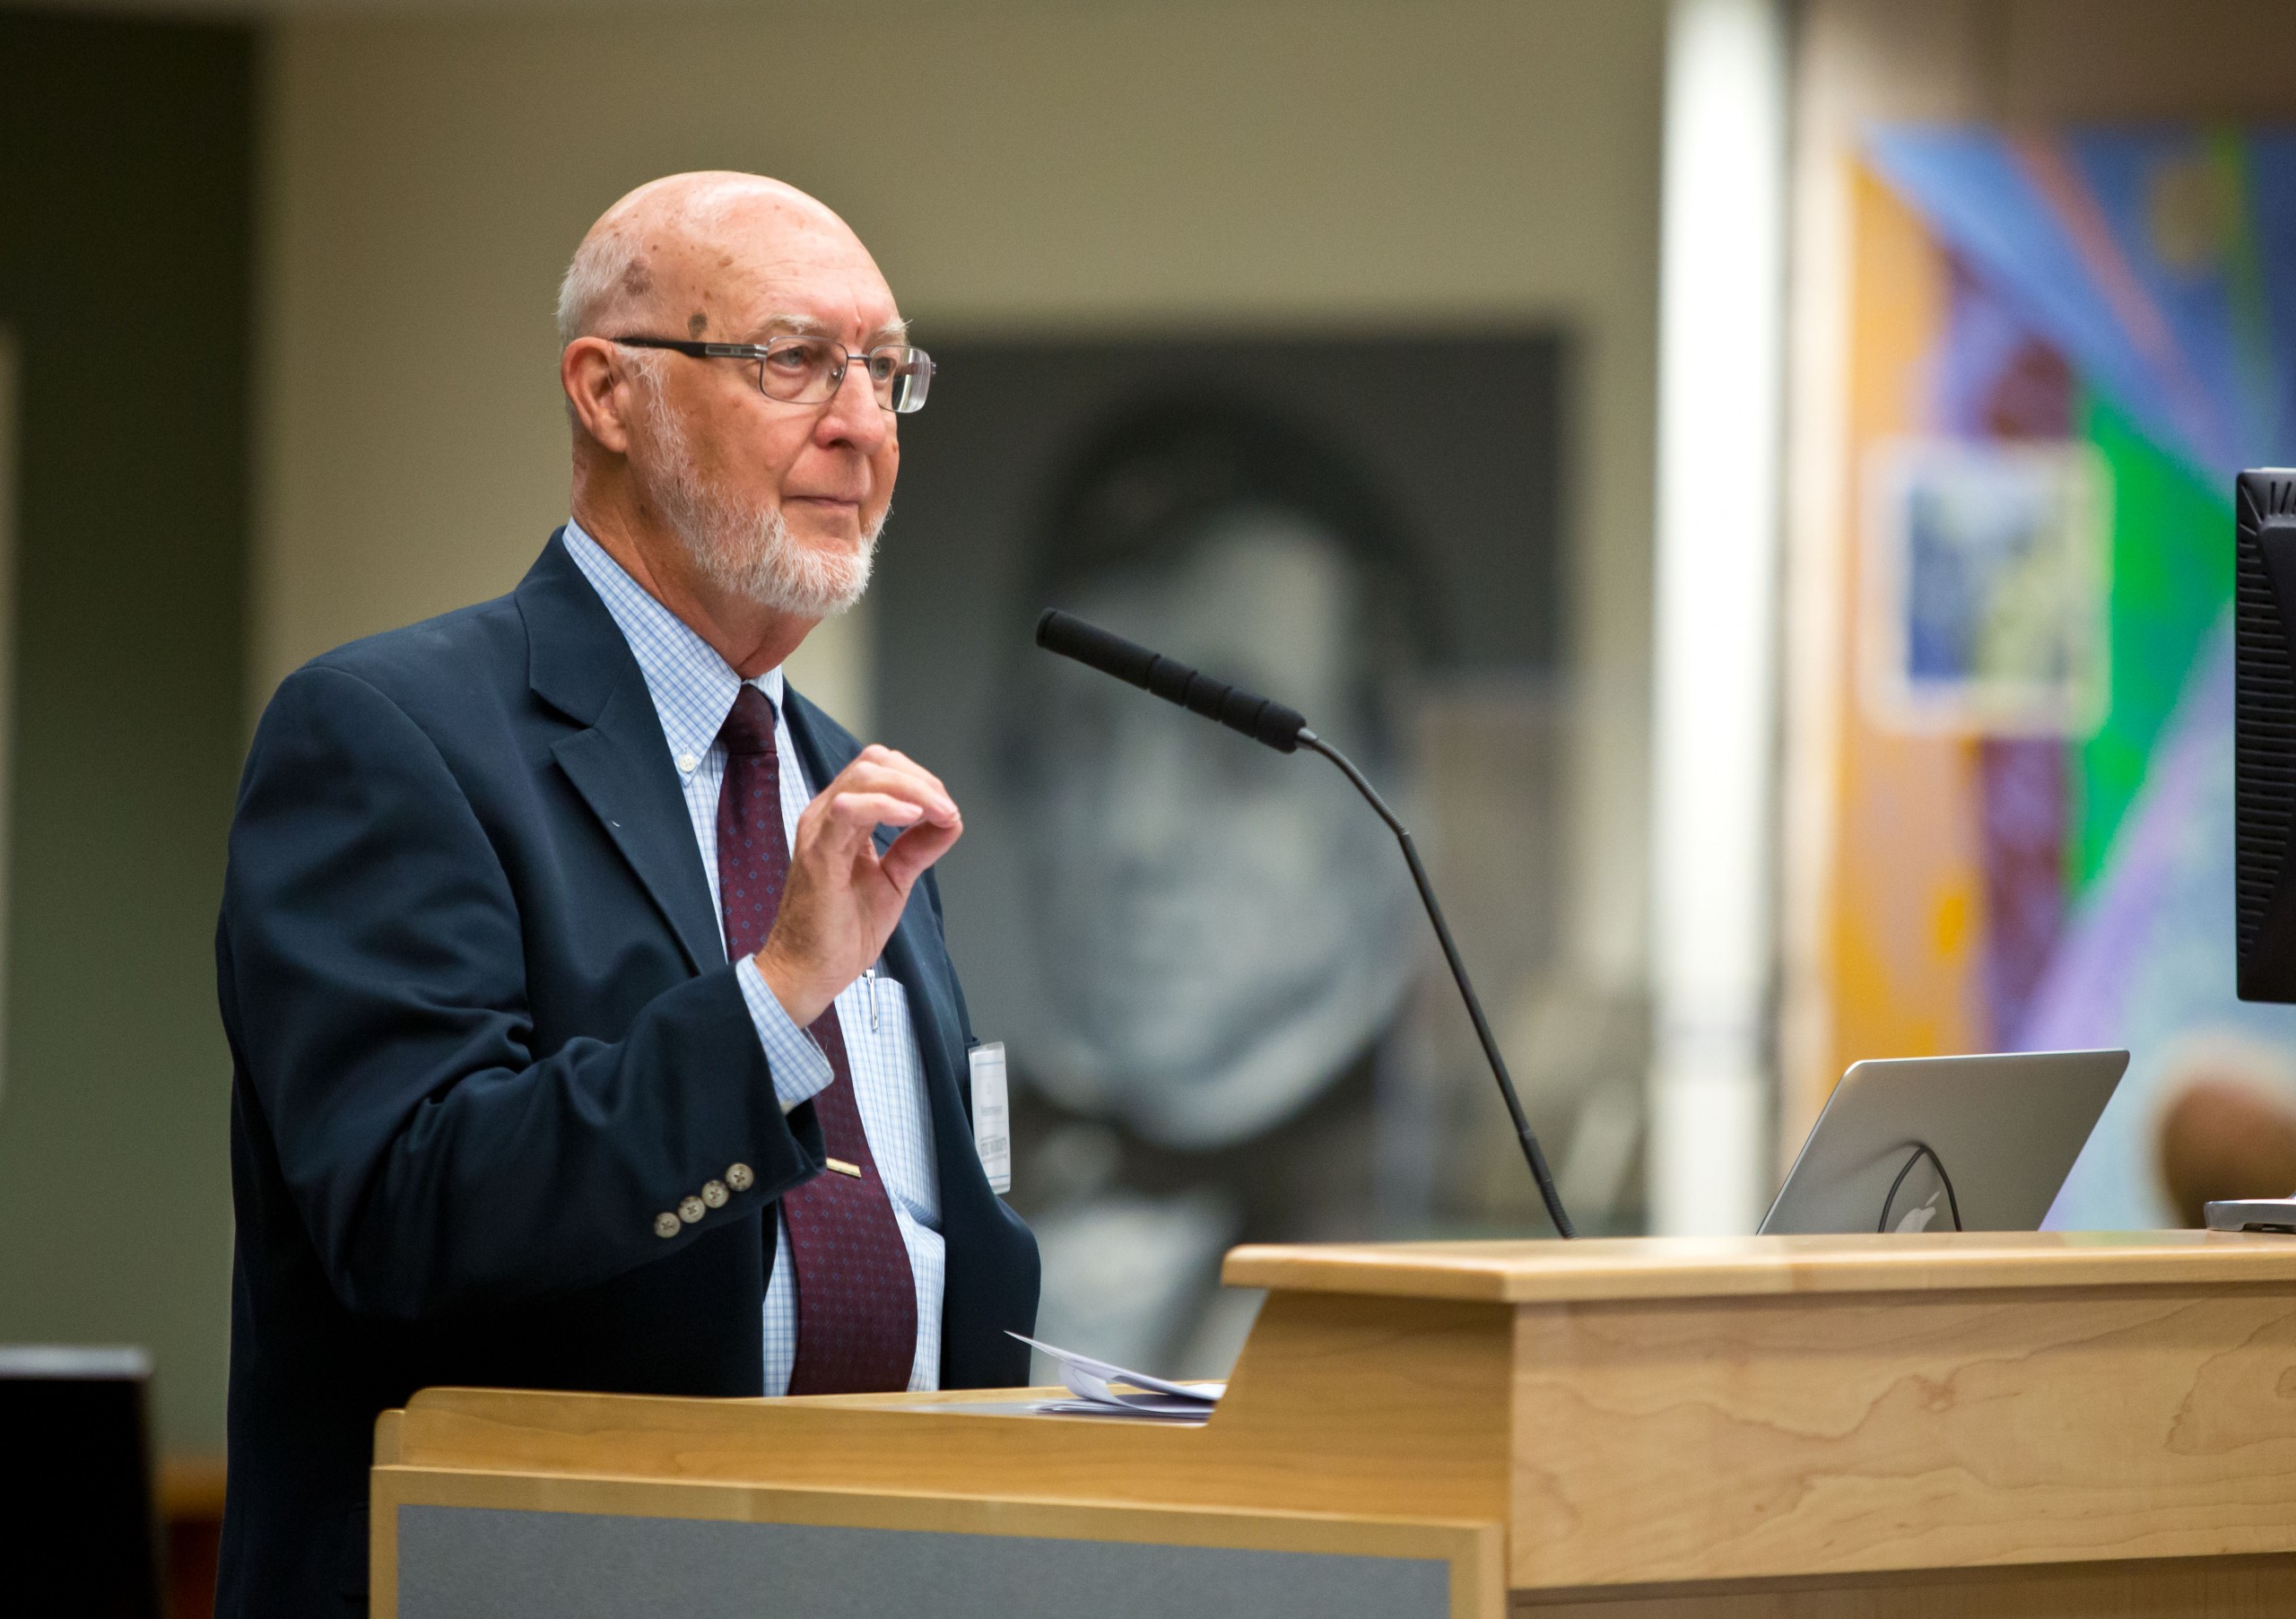 Paul Westermeyer, Professor of Church Music Emeritus at Luther Seminary speaks of singing justice at the Lutheran Studies Conference at PLU on Thursday, Sept. 25, 2014. (Photo/John Froschauer)